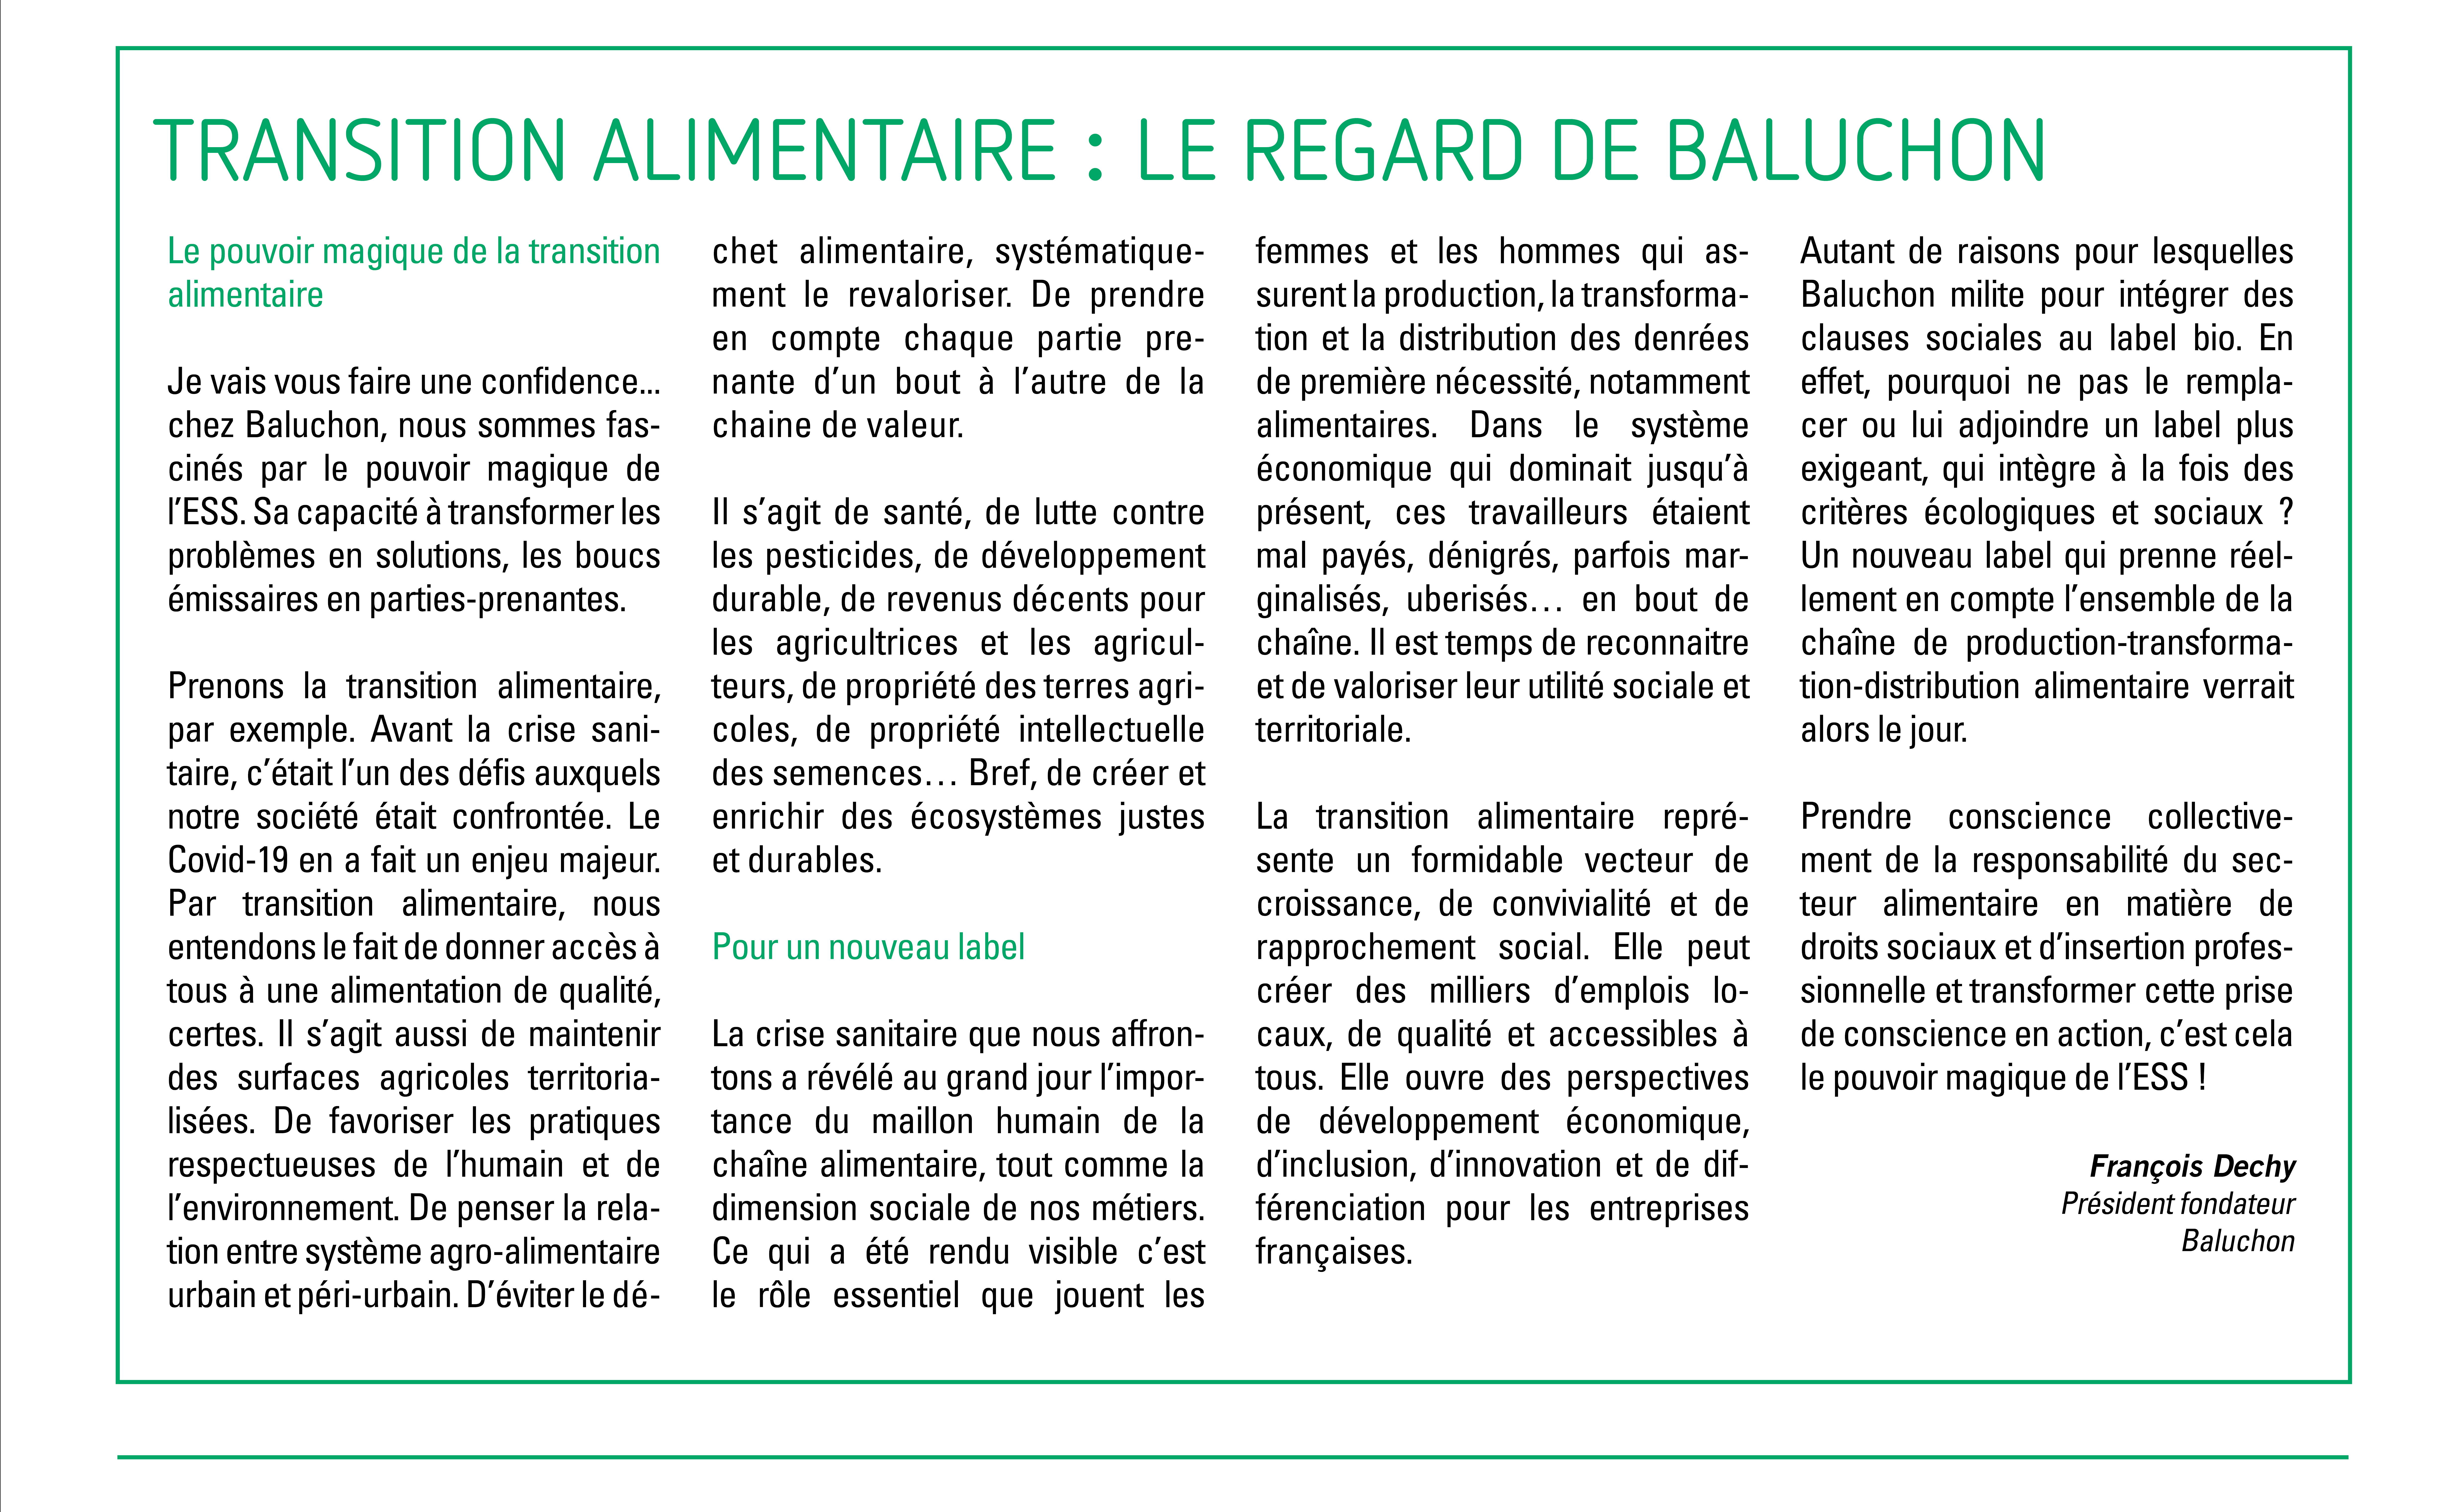 Food transition: Baluchon’s perspective